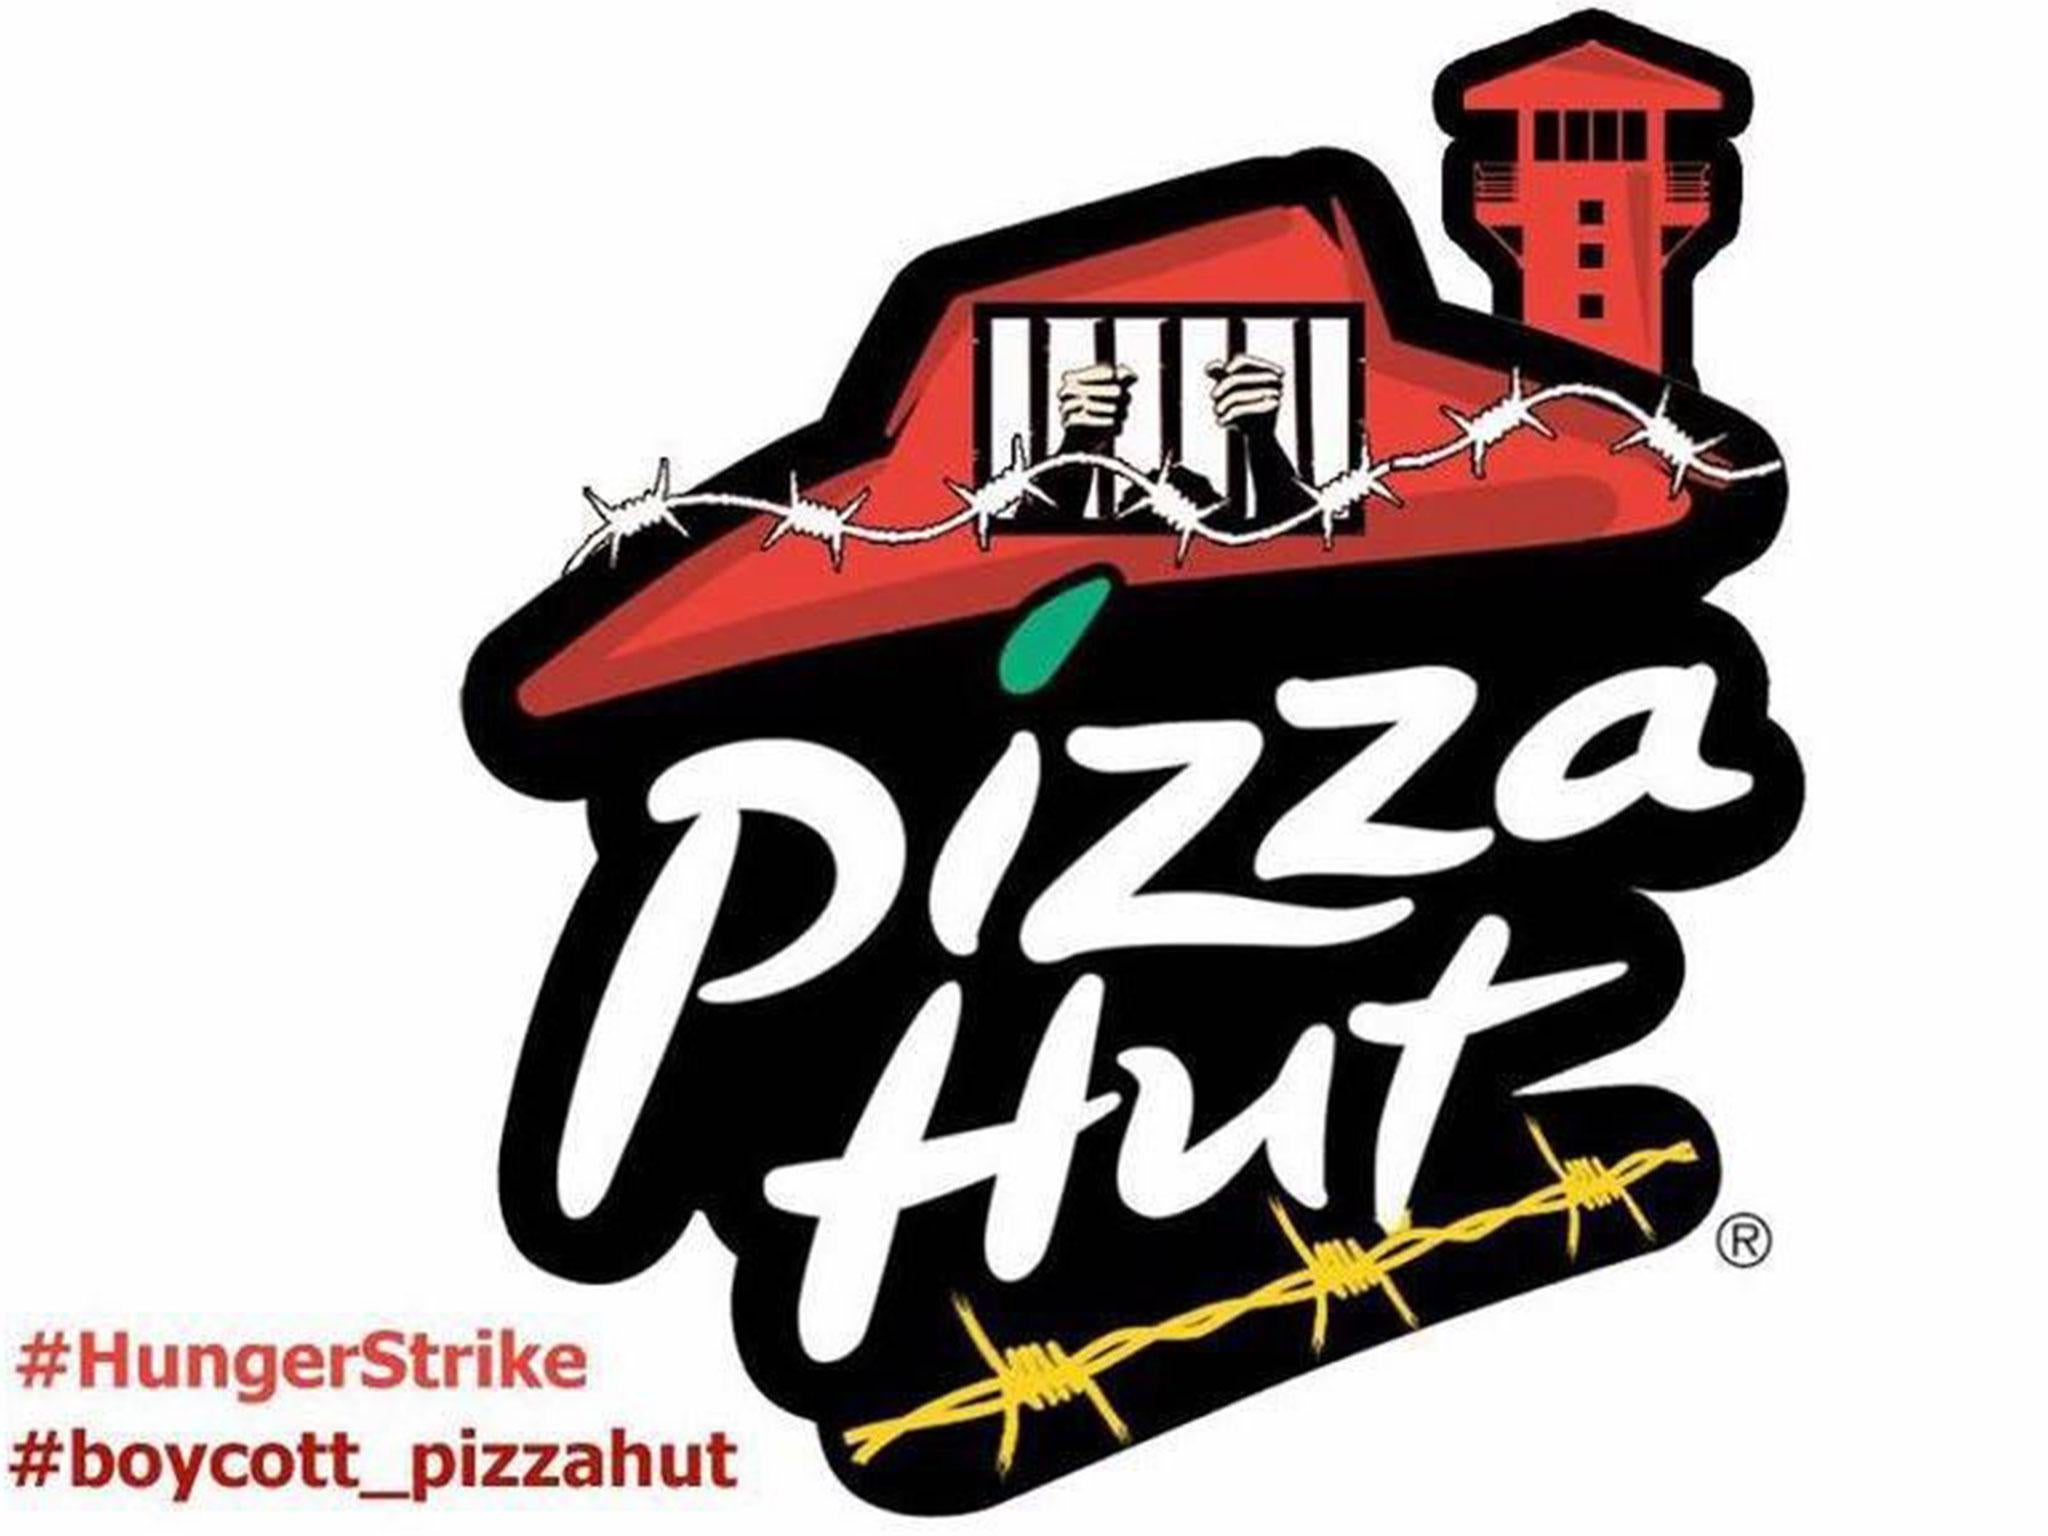 Some Palestinians and pro-Palestinian activists shared a modified version of the Pizza Hut logo